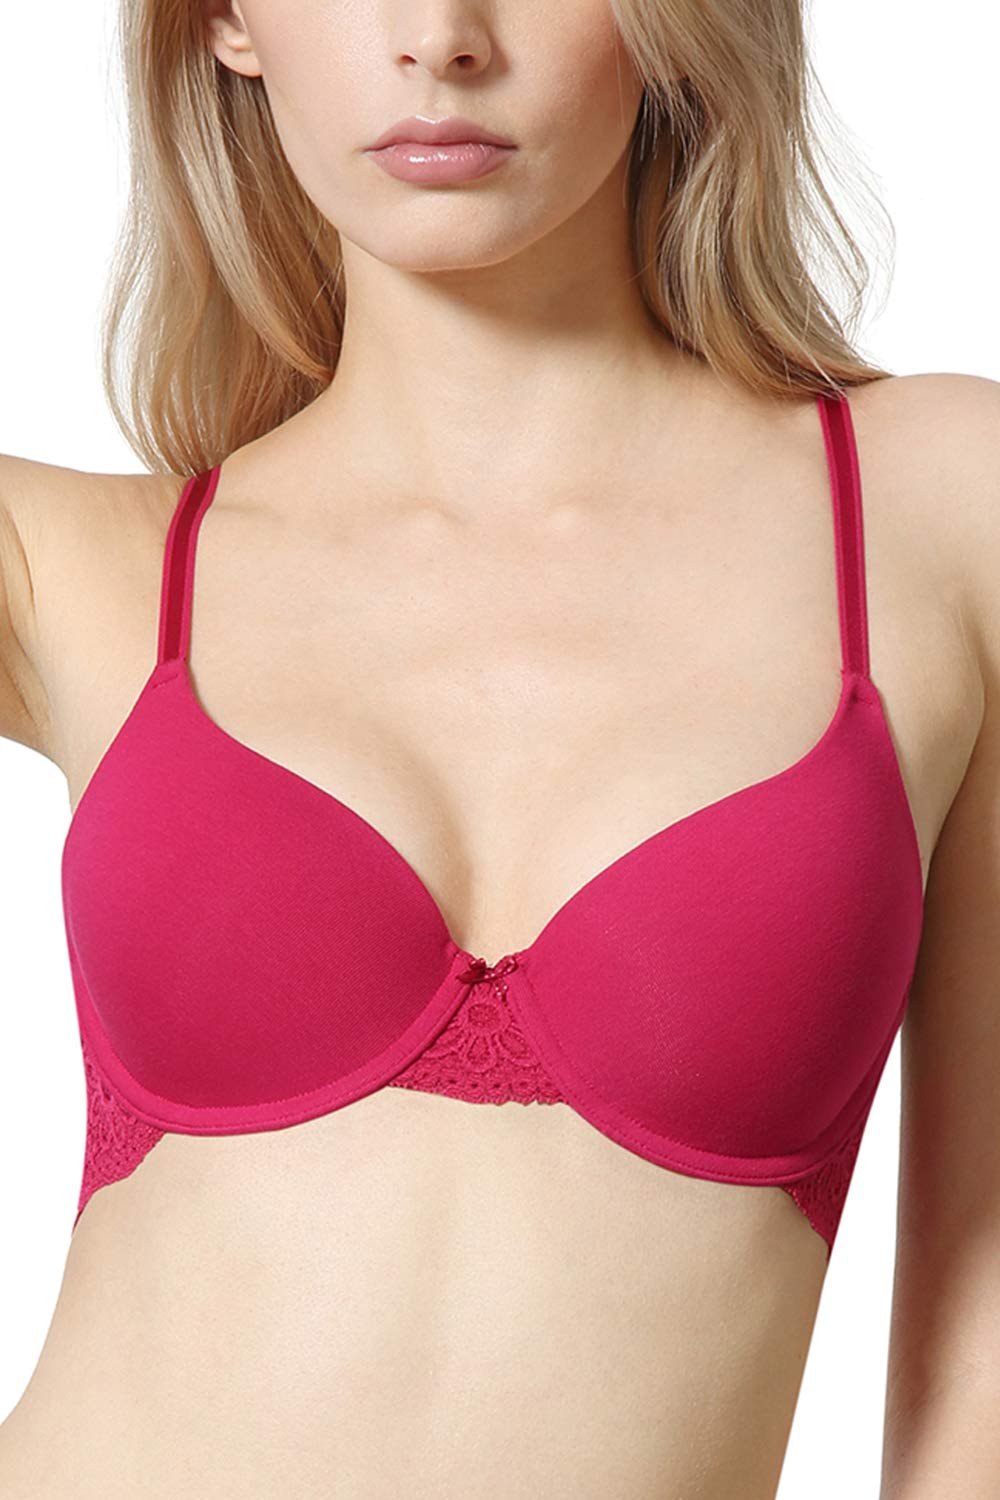 Amante 32F Peach Support Bra in Kozhikode - Dealers, Manufacturers &  Suppliers - Justdial